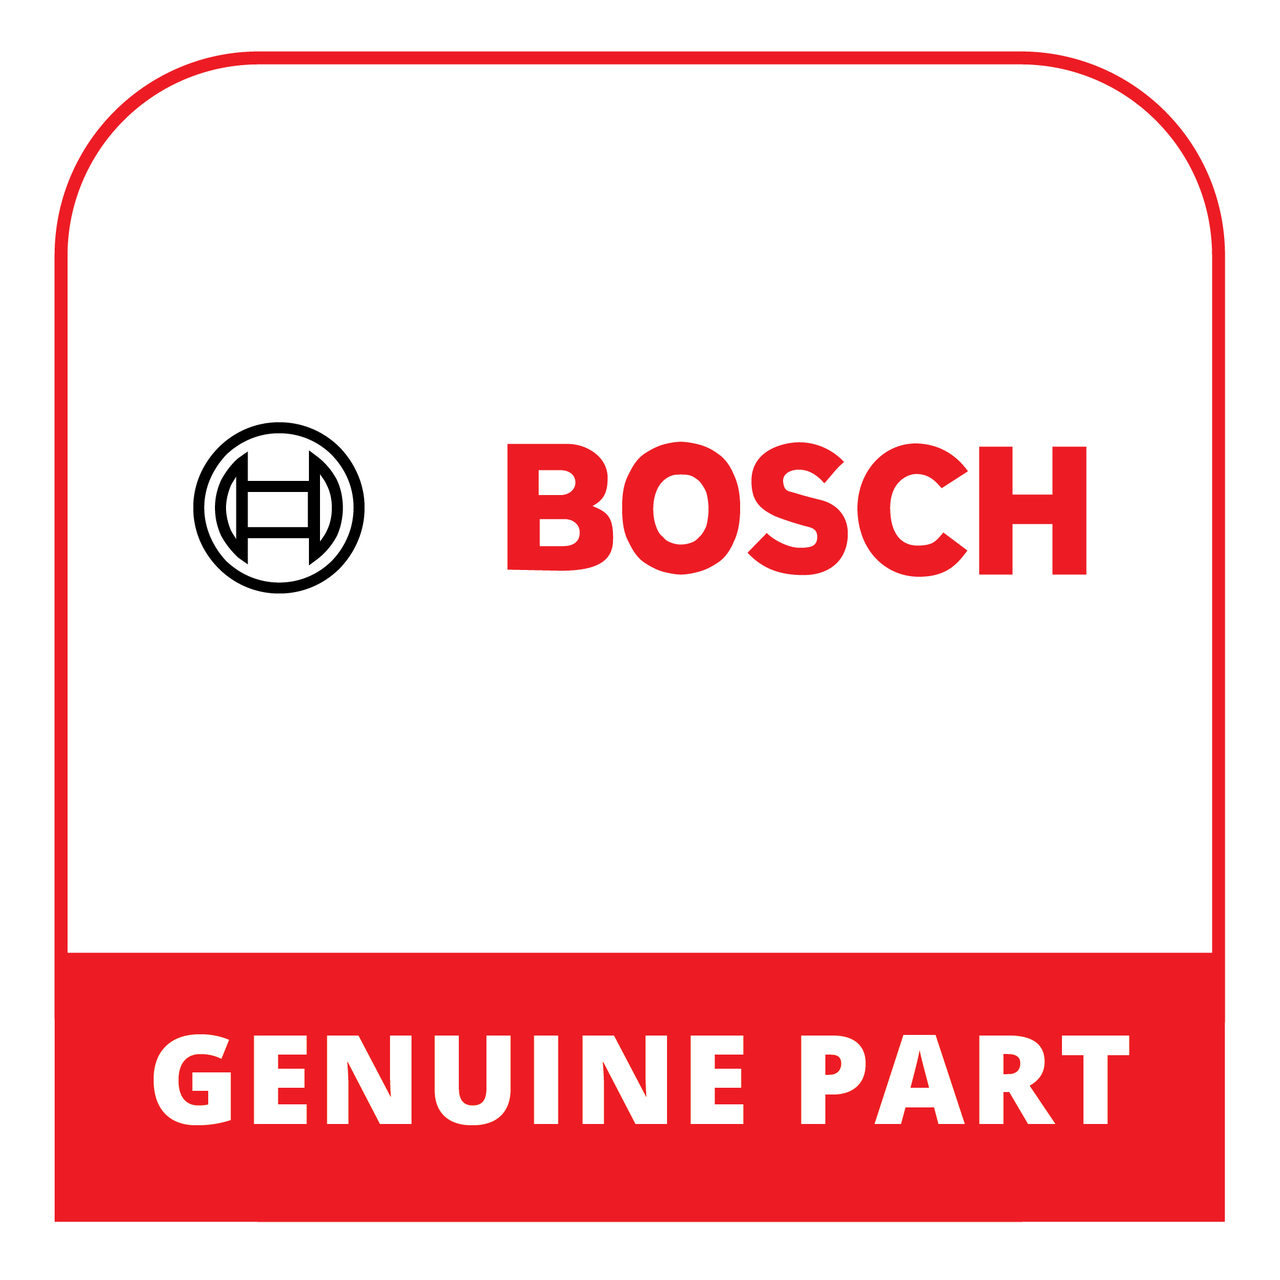 Bosch (Thermador) 10009585 - Spring - Genuine Bosch (Thermador) Part